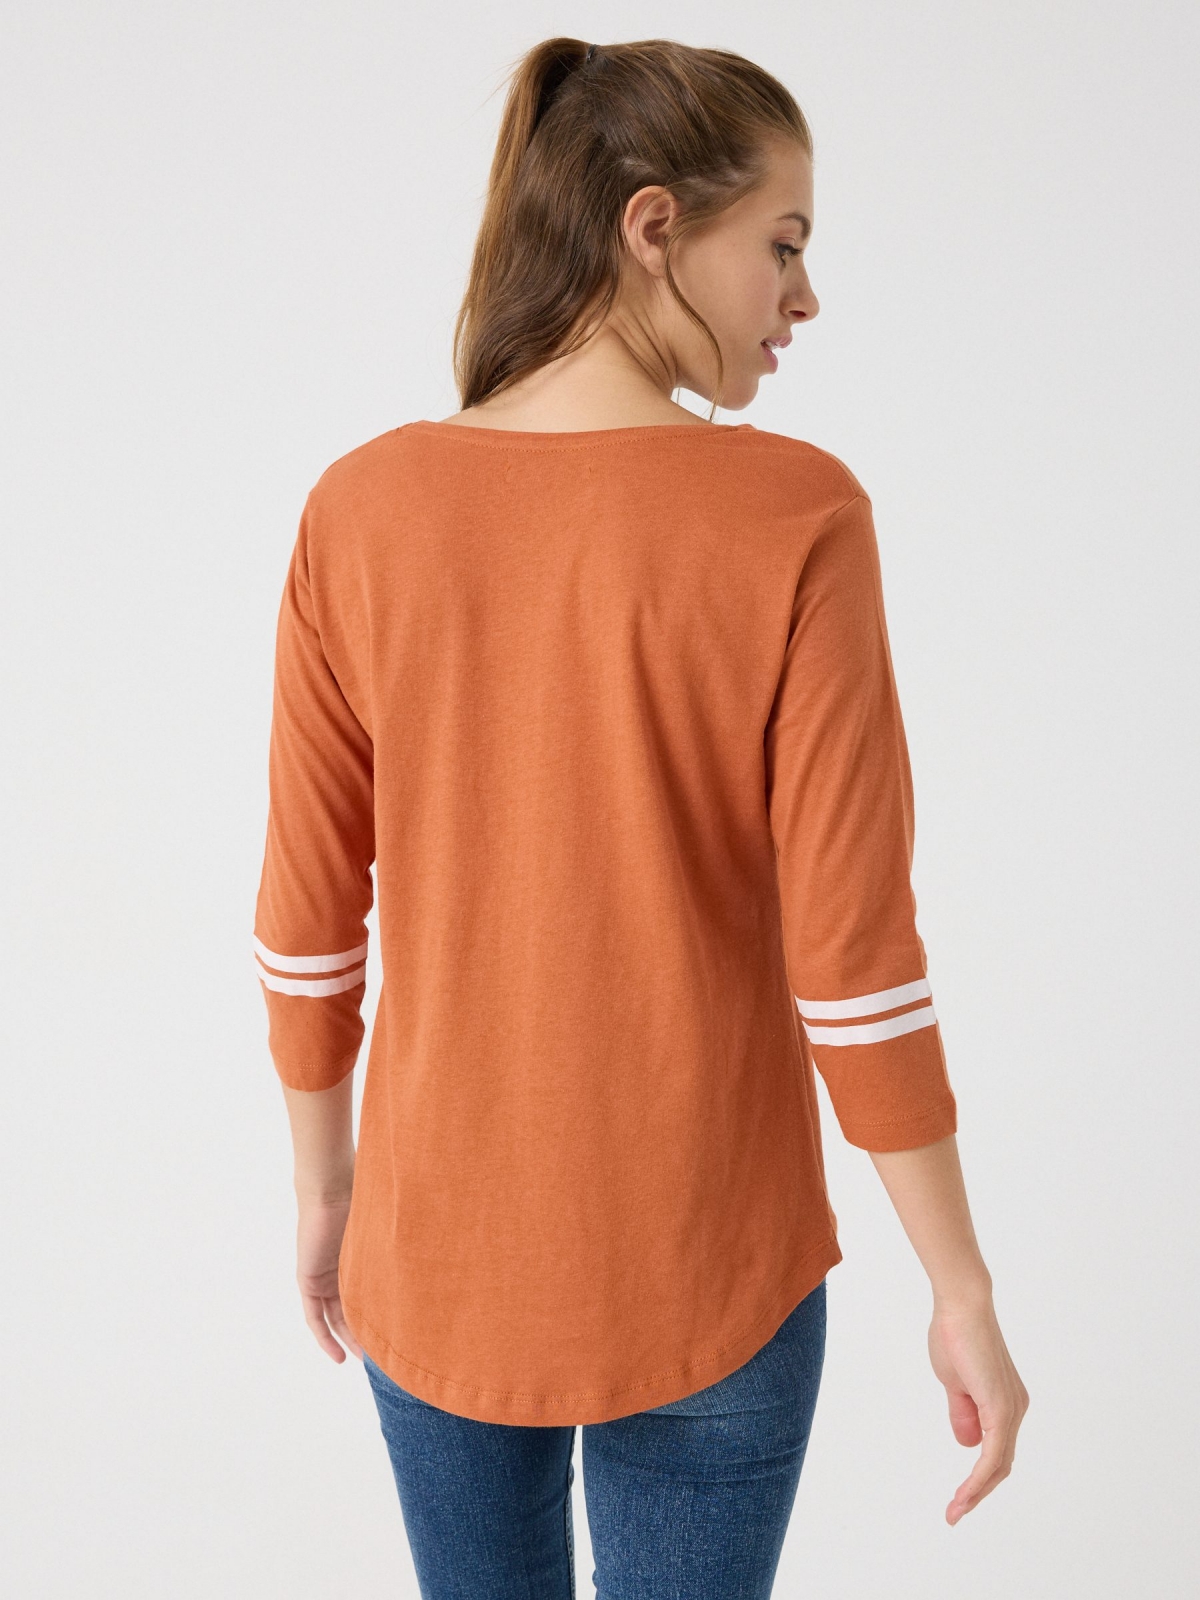 High Level 3/4 sleeve t-shirt copper middle back view